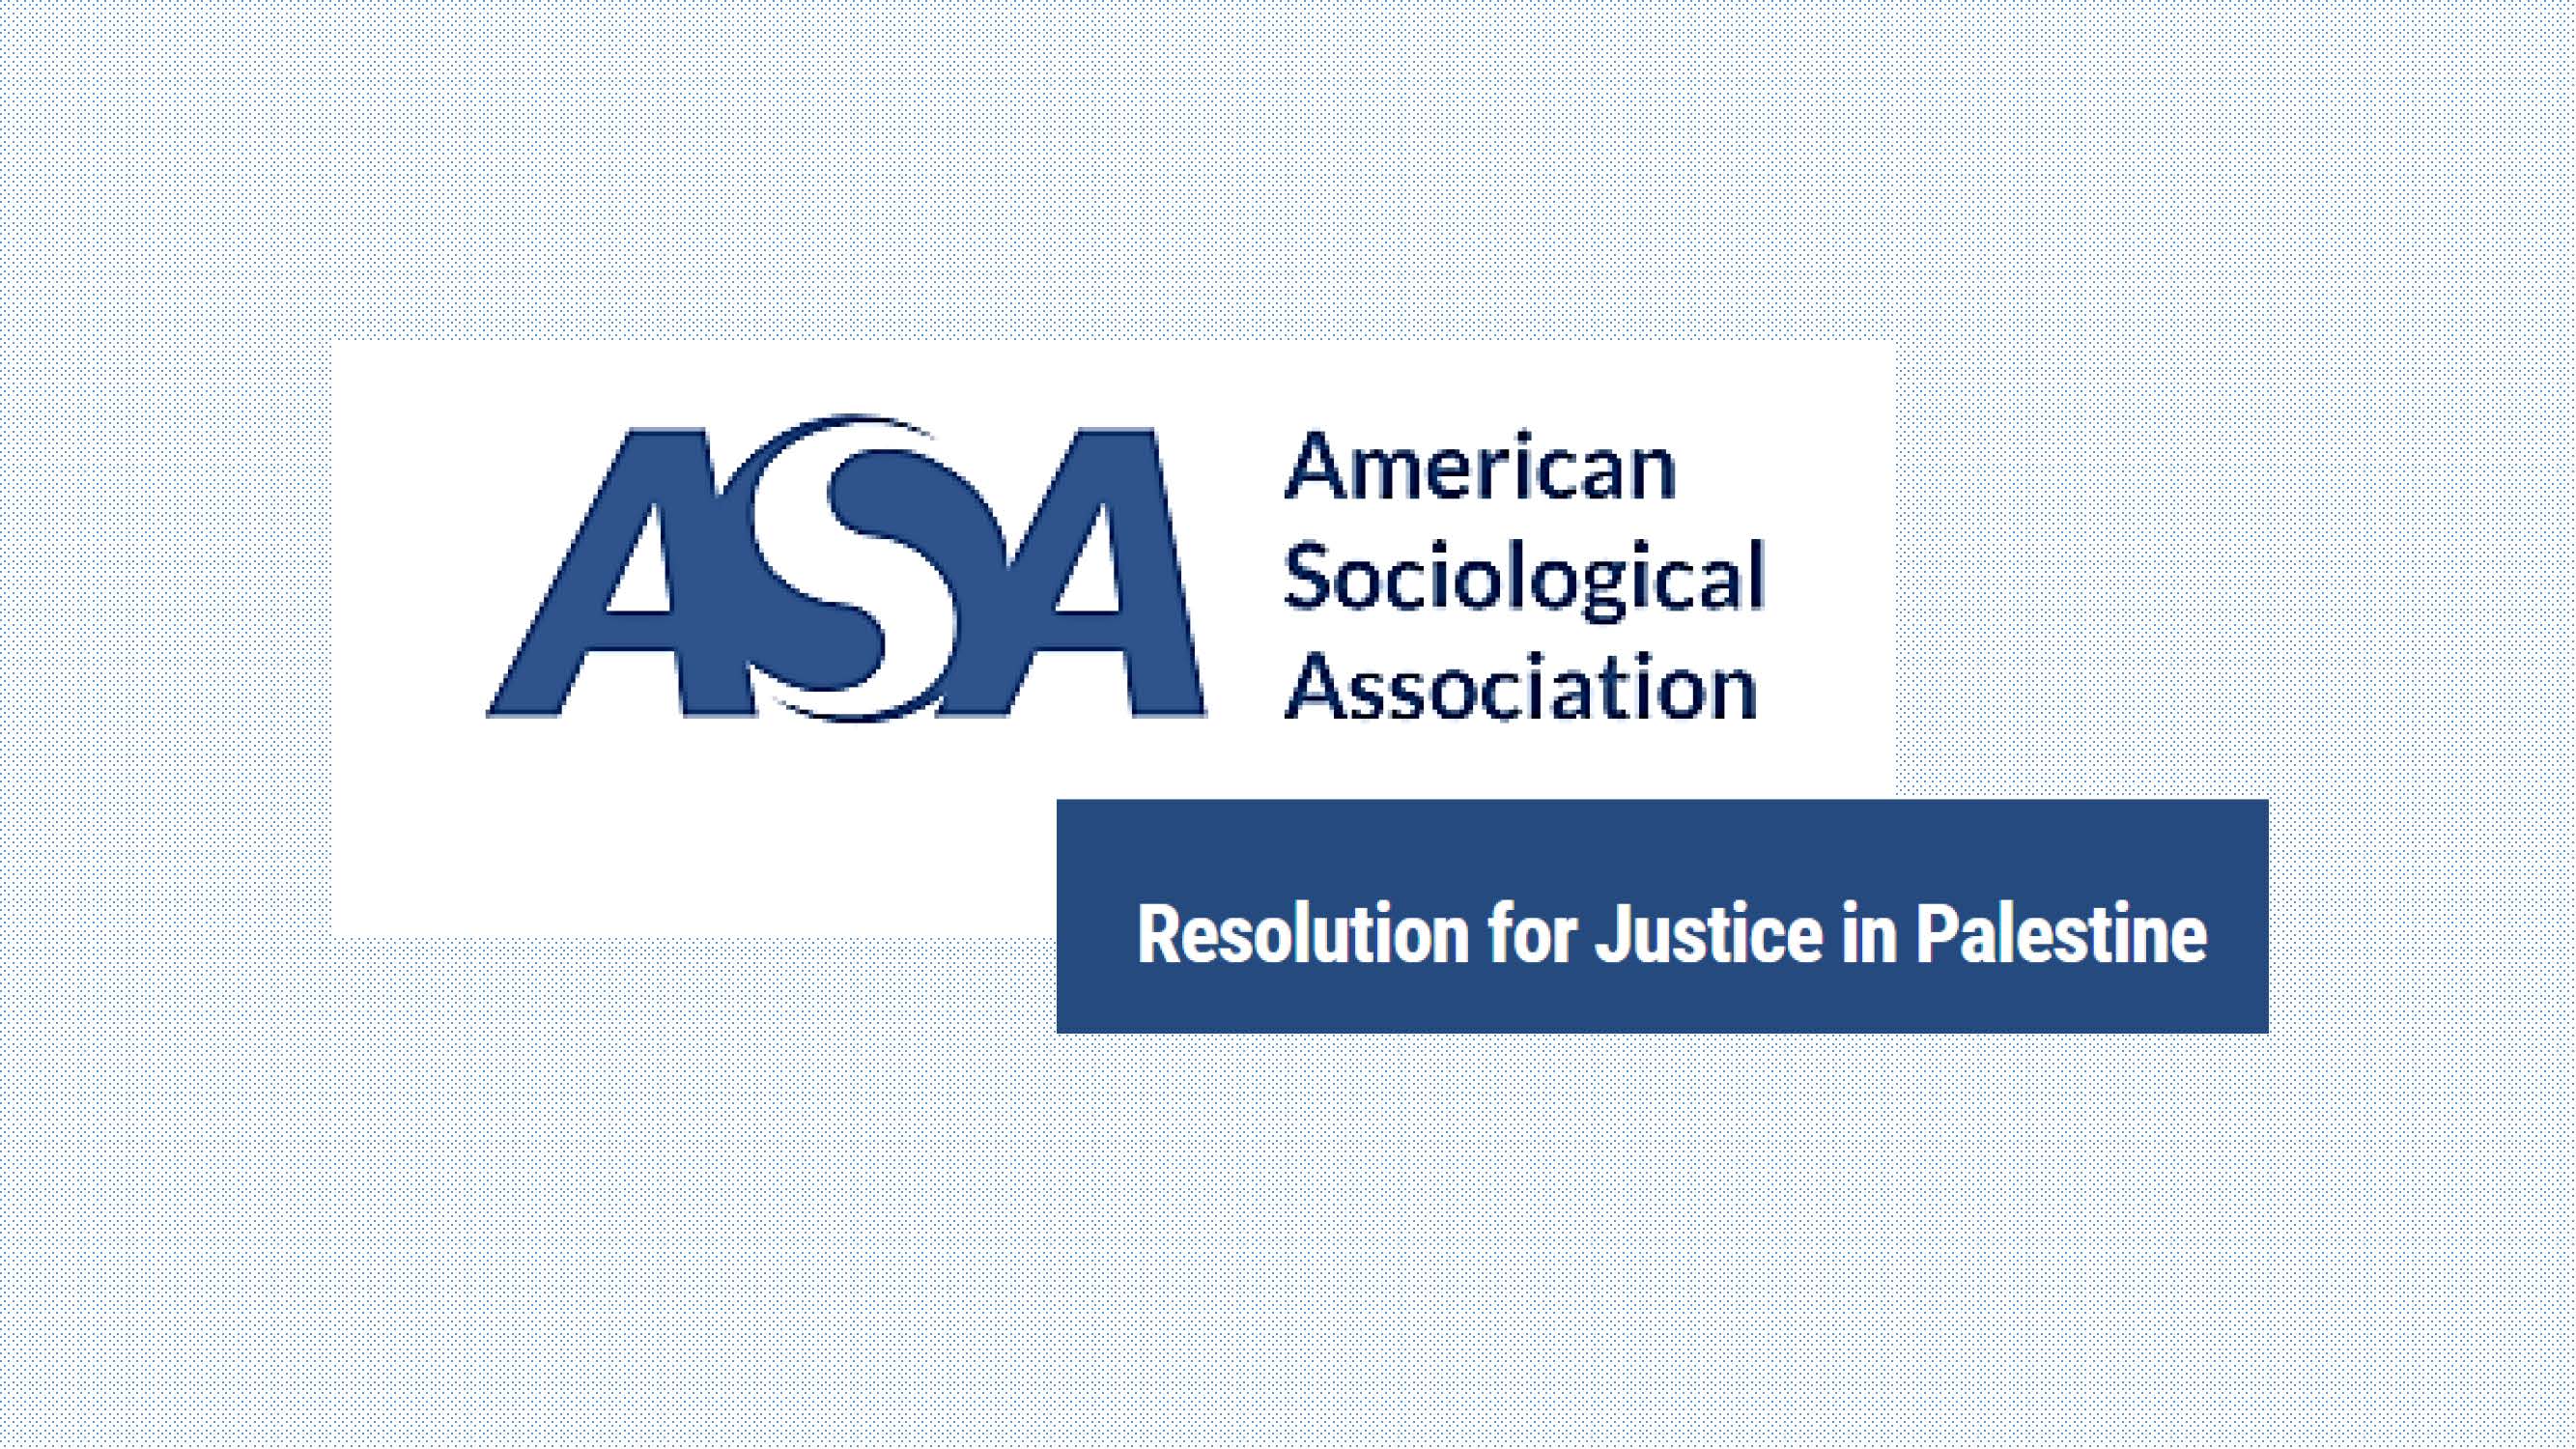 American Sociological Association's Resolution for Justice in Palestine